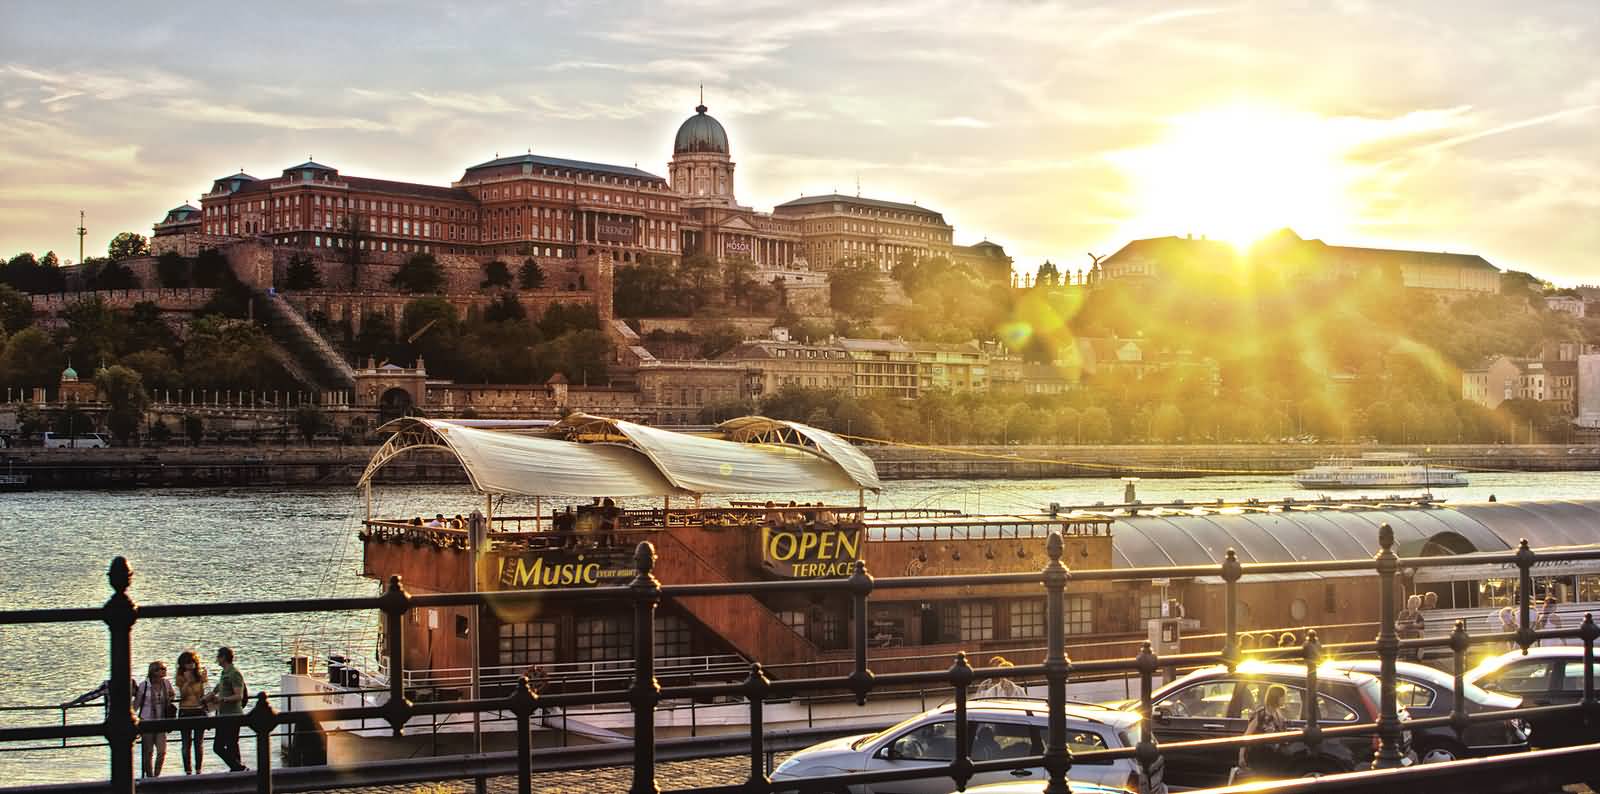 Adorable View Of The Buda Castle During Sunrise